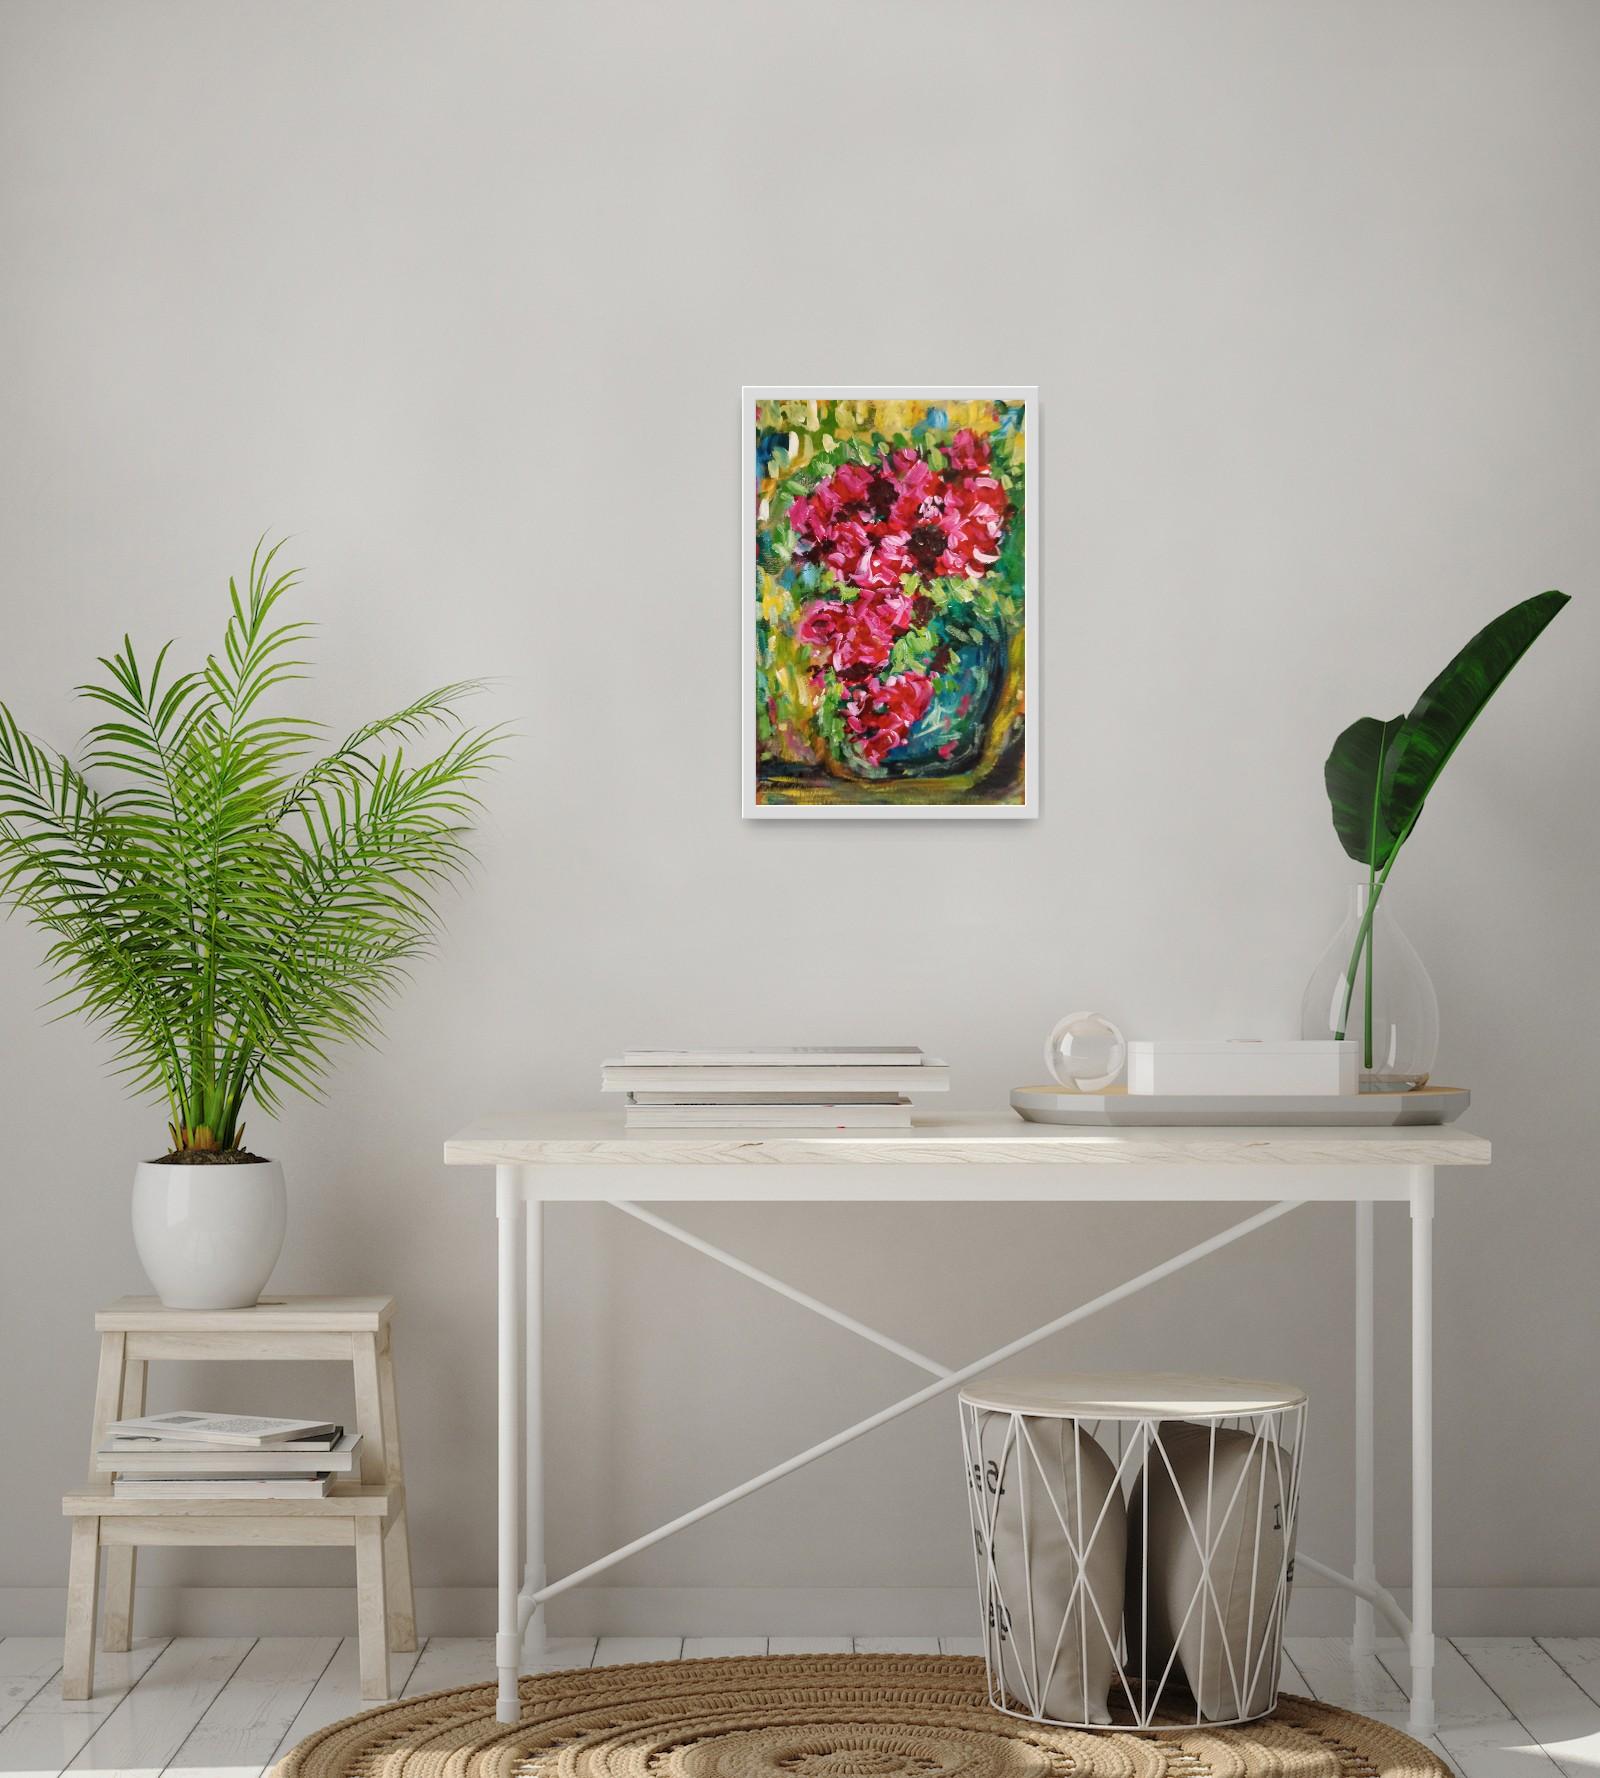 
In this abstract floral artwork I experience the world of nature through the bright colors of a summer period.

While painting, I sought to capture the beauty of summer flowers which are full of different colors.

In my art practice I love to use